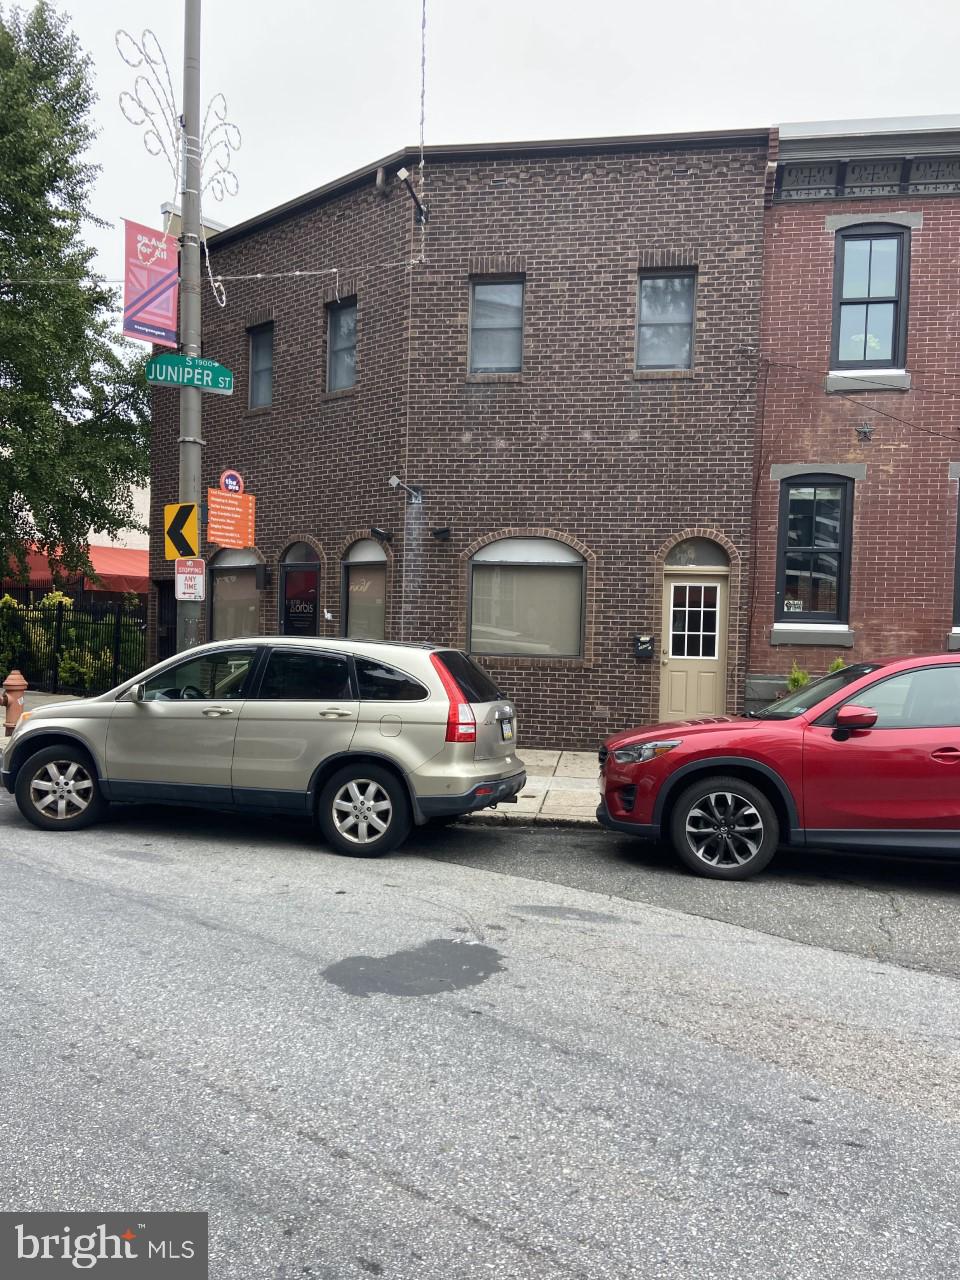 a couple of cars parked in front of a brick building